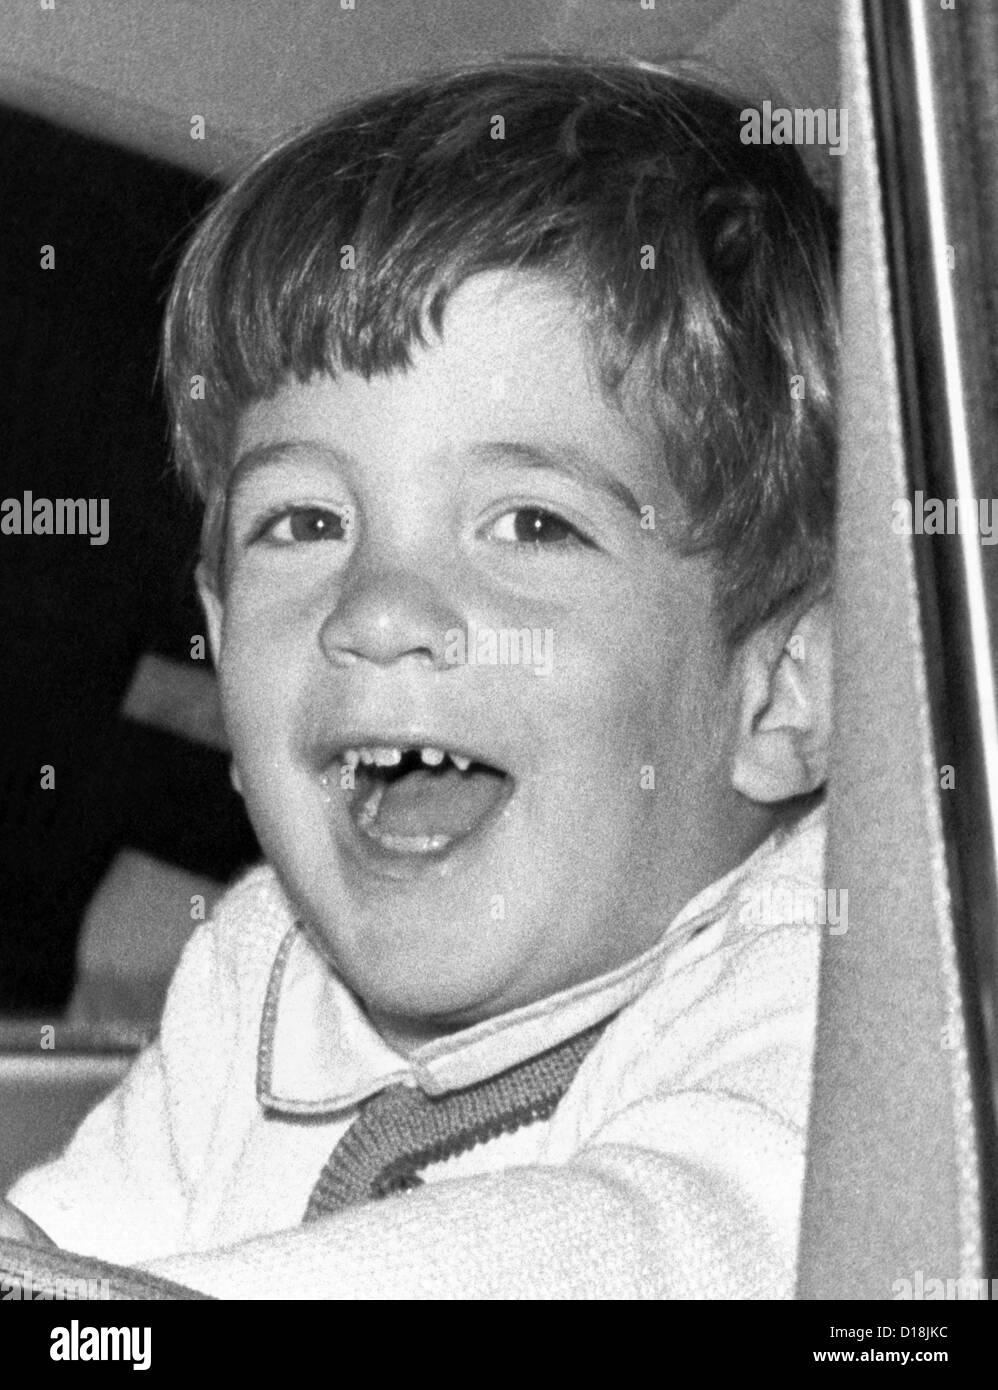 JFK: The Early Years - Photo 1 - Pictures - CBS News